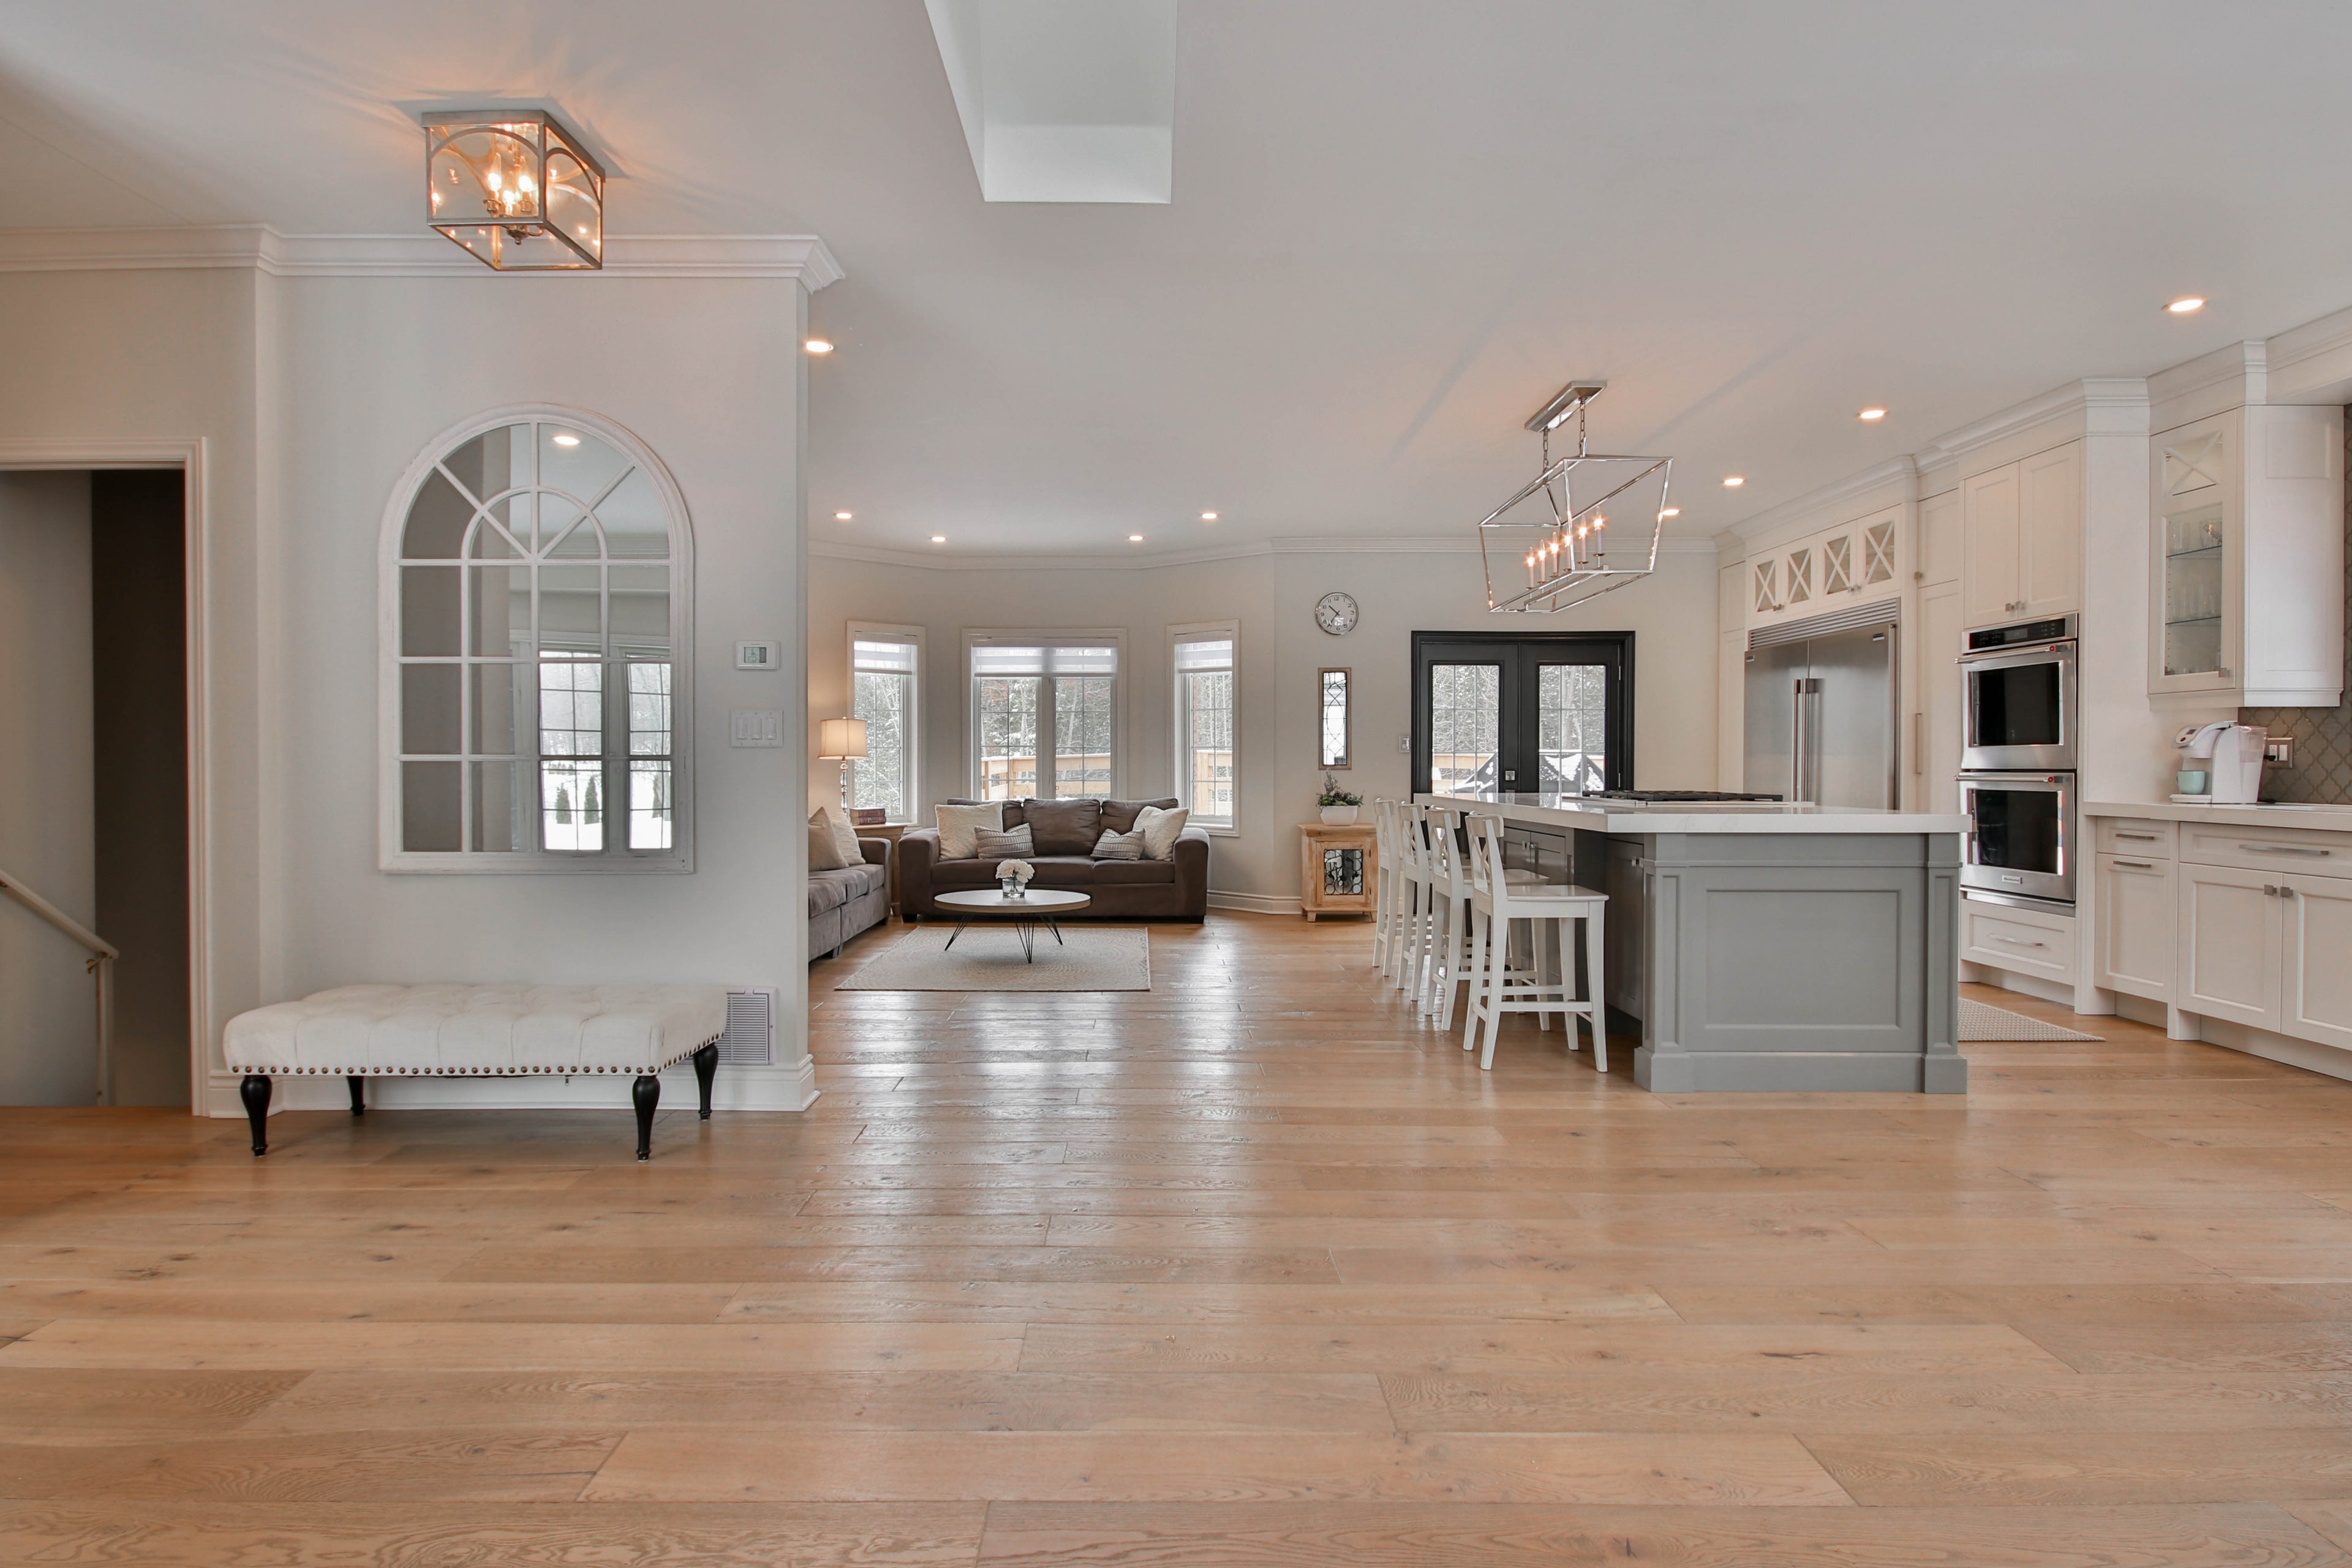 Photo of Hewn Stoneform Luxury Plank Flooring in a beautiful home with an open kitchen